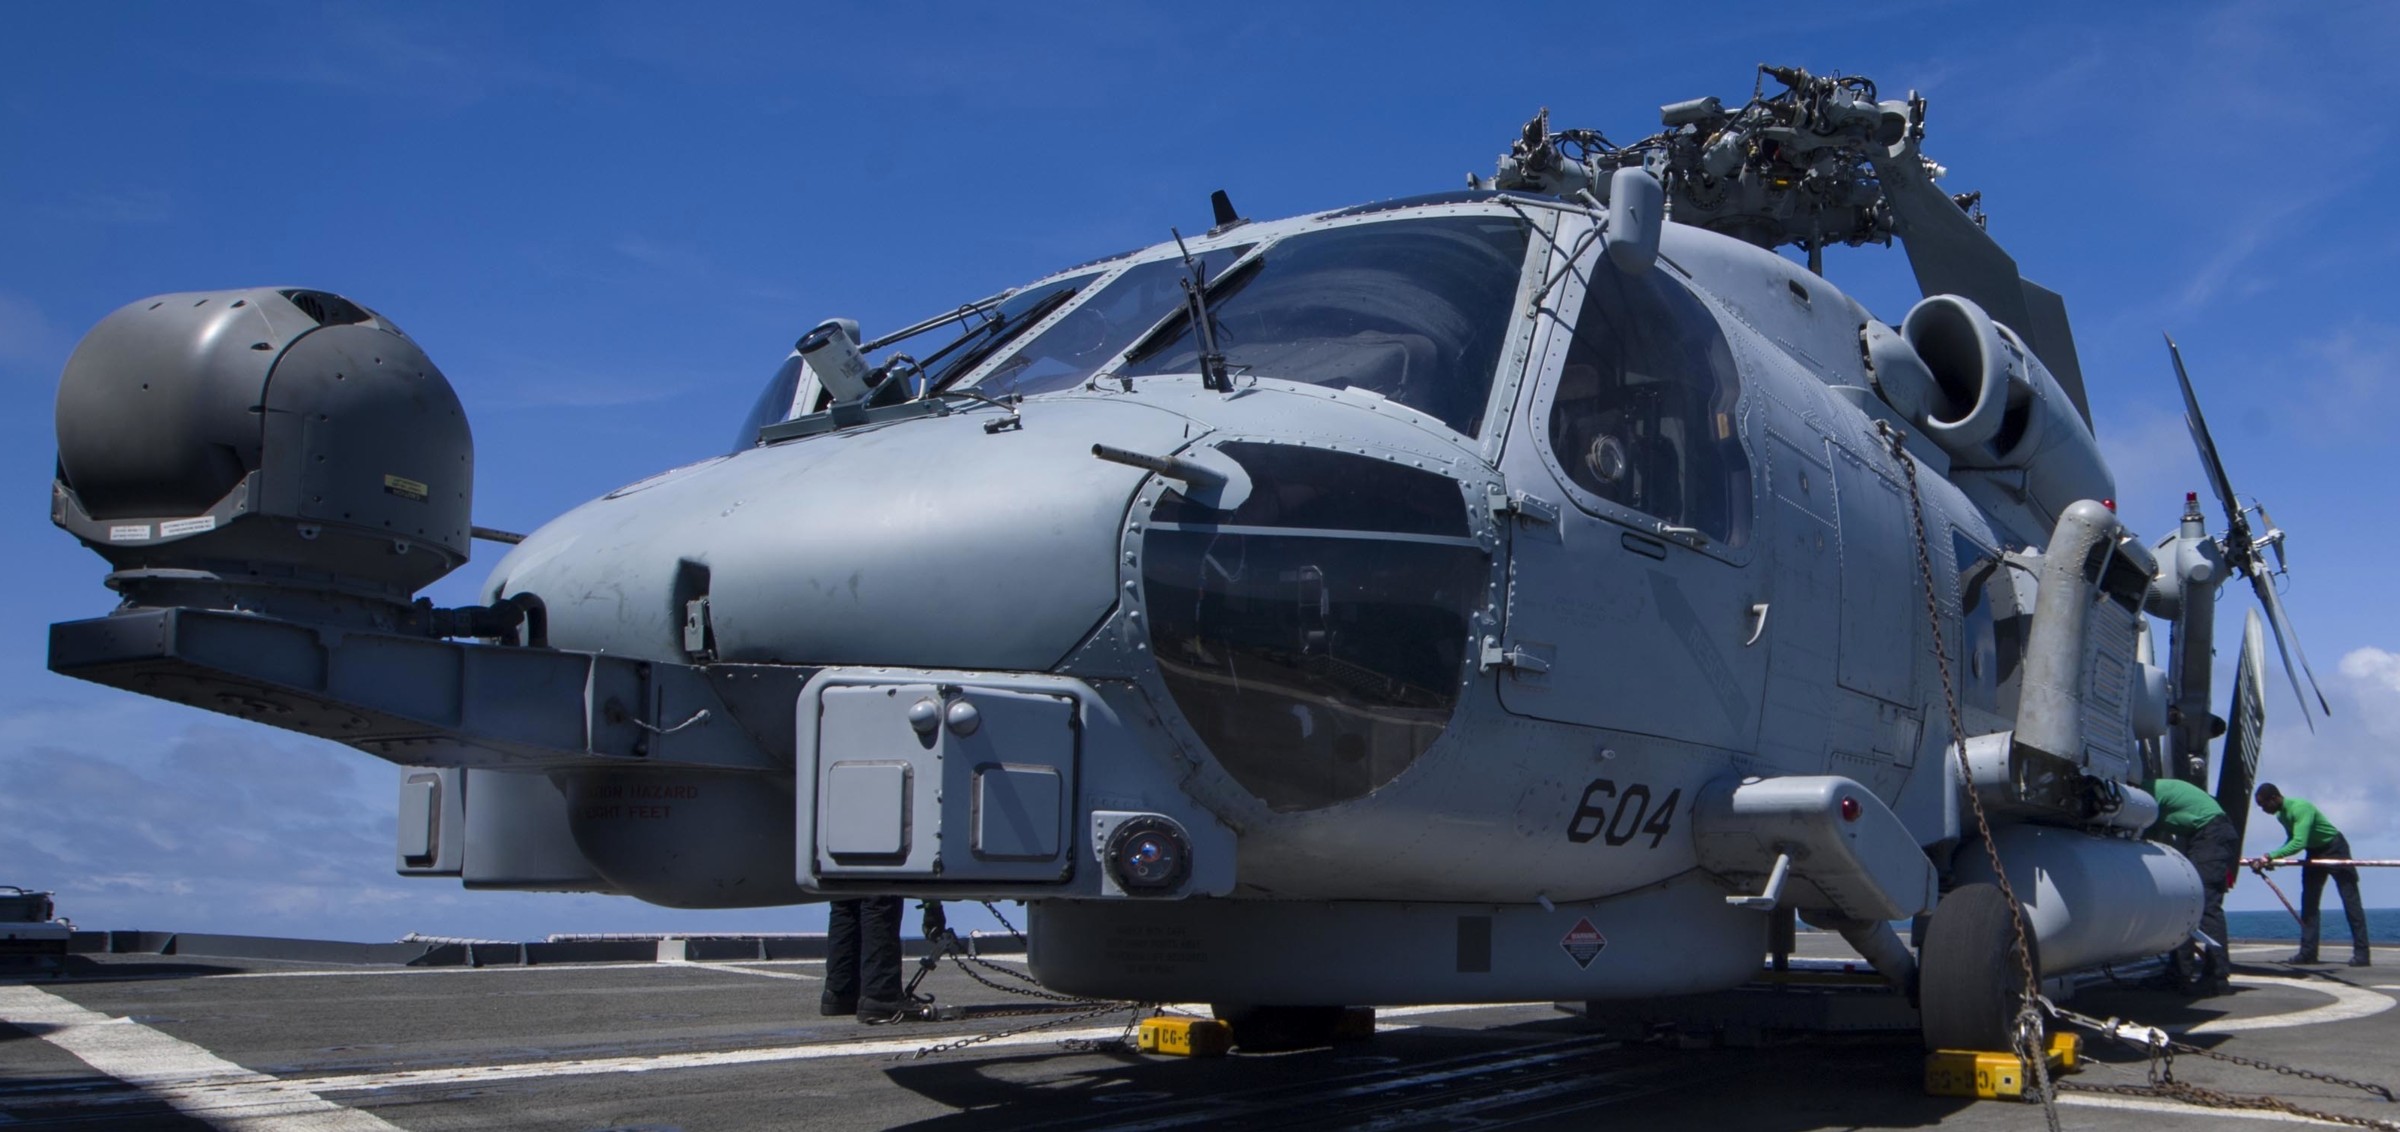 hsm-60 jaguars helicopter maritime strike squadron navy mh-60r seahawk 2017 04